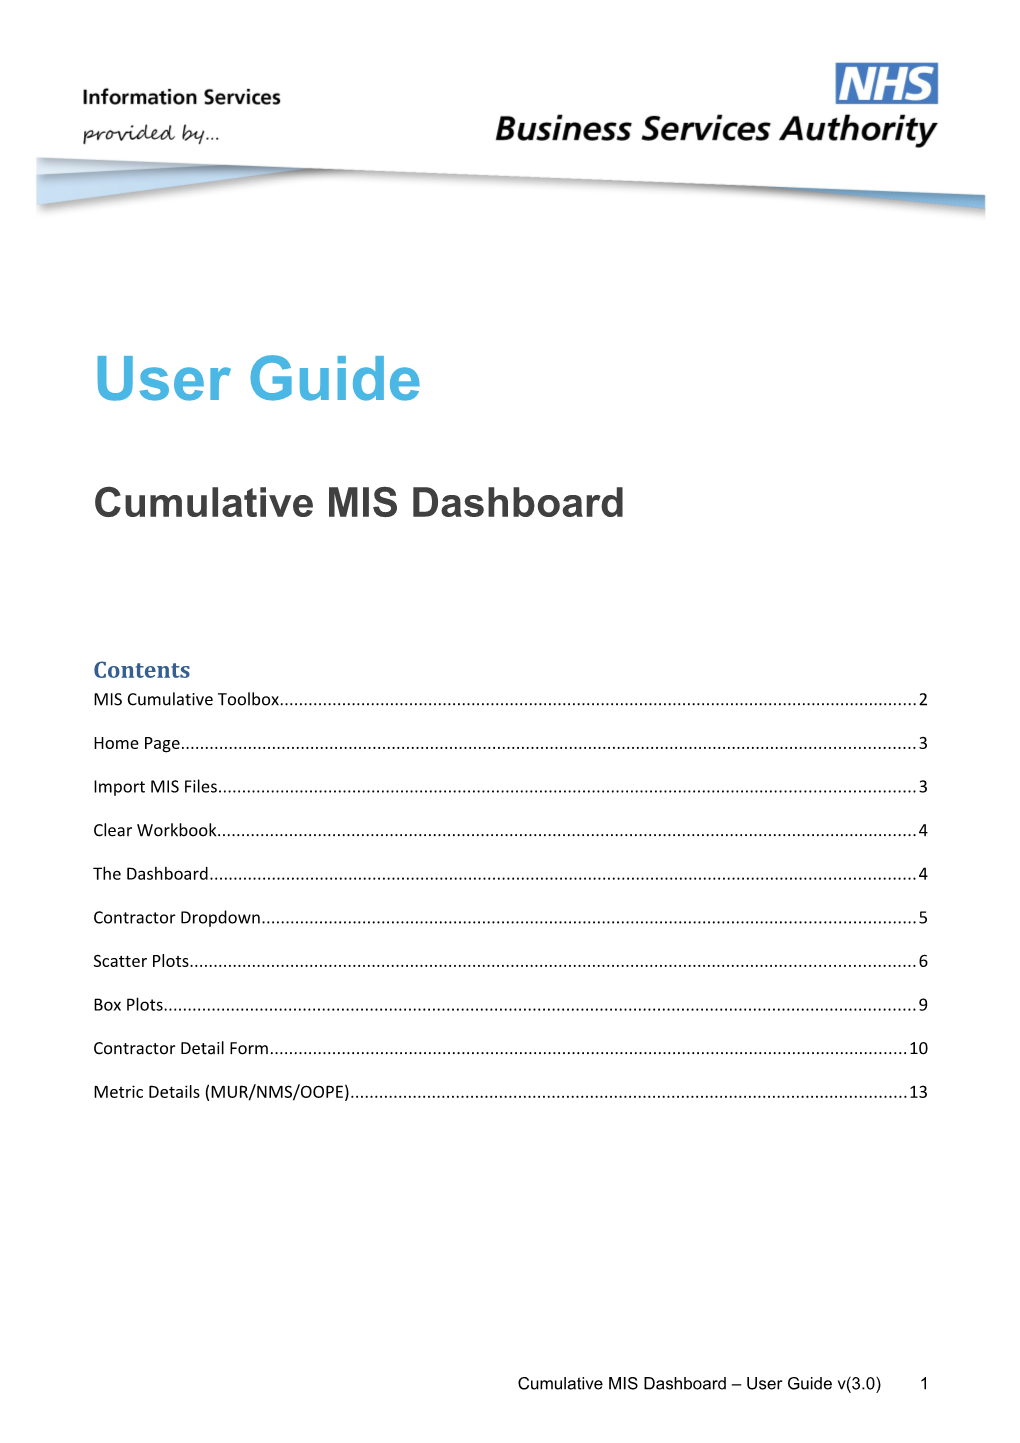 Information Services Report Template V1